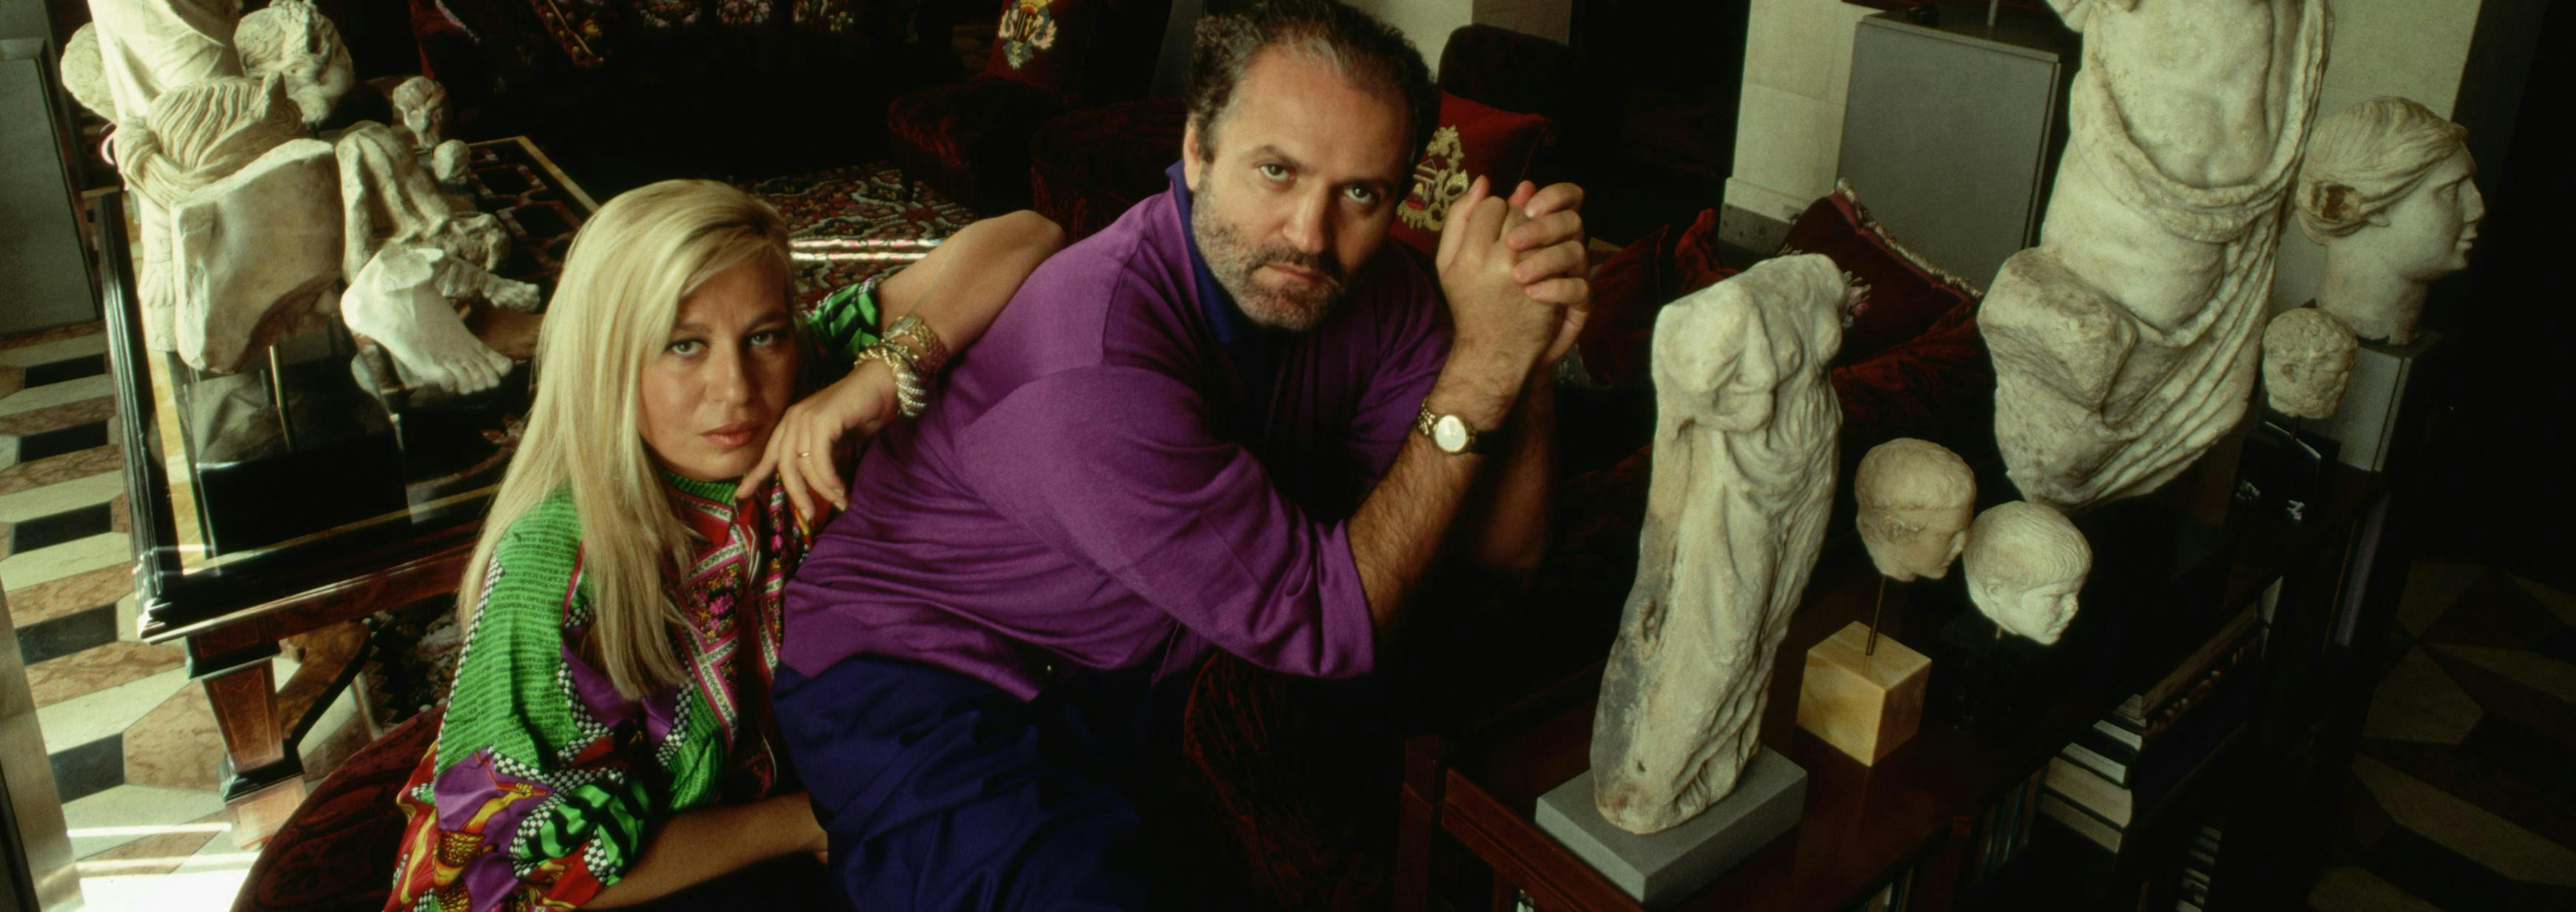 two people domestic scene adult fashion design italian southern european descent visual arts prominent persons brother male wealth female opulence sculpture sister art collector fashion designer milan donatella versace gianni versace person human couch furniture clothing apparel